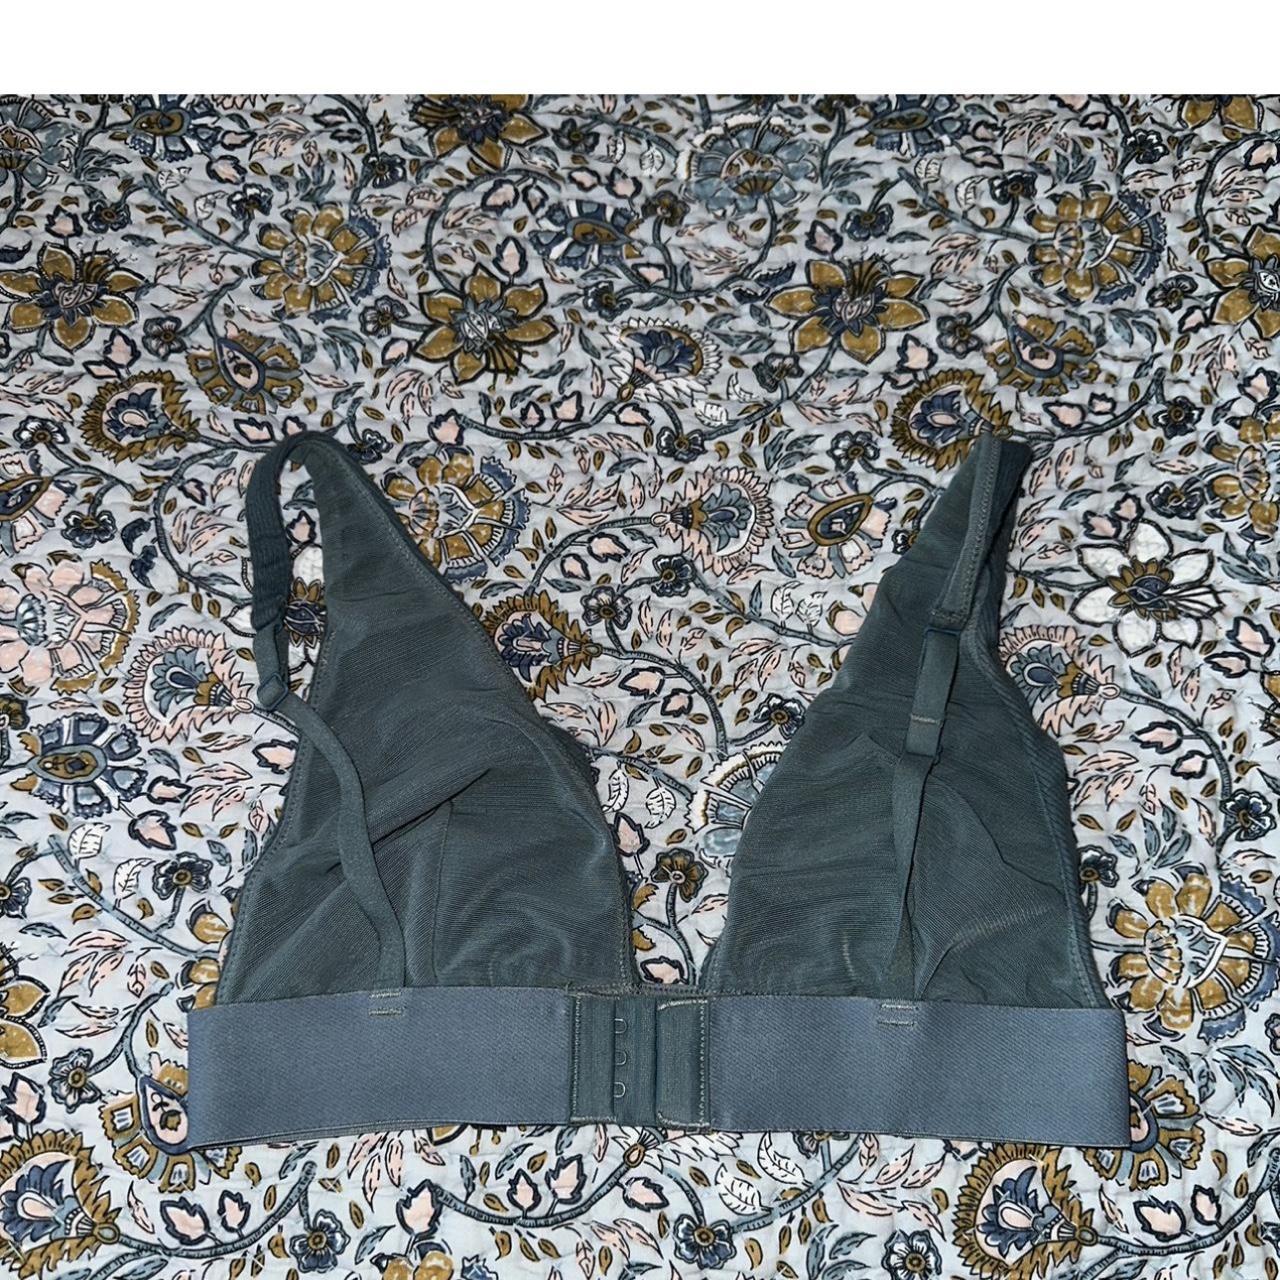 Skims cotton plunge bralette, used but in good